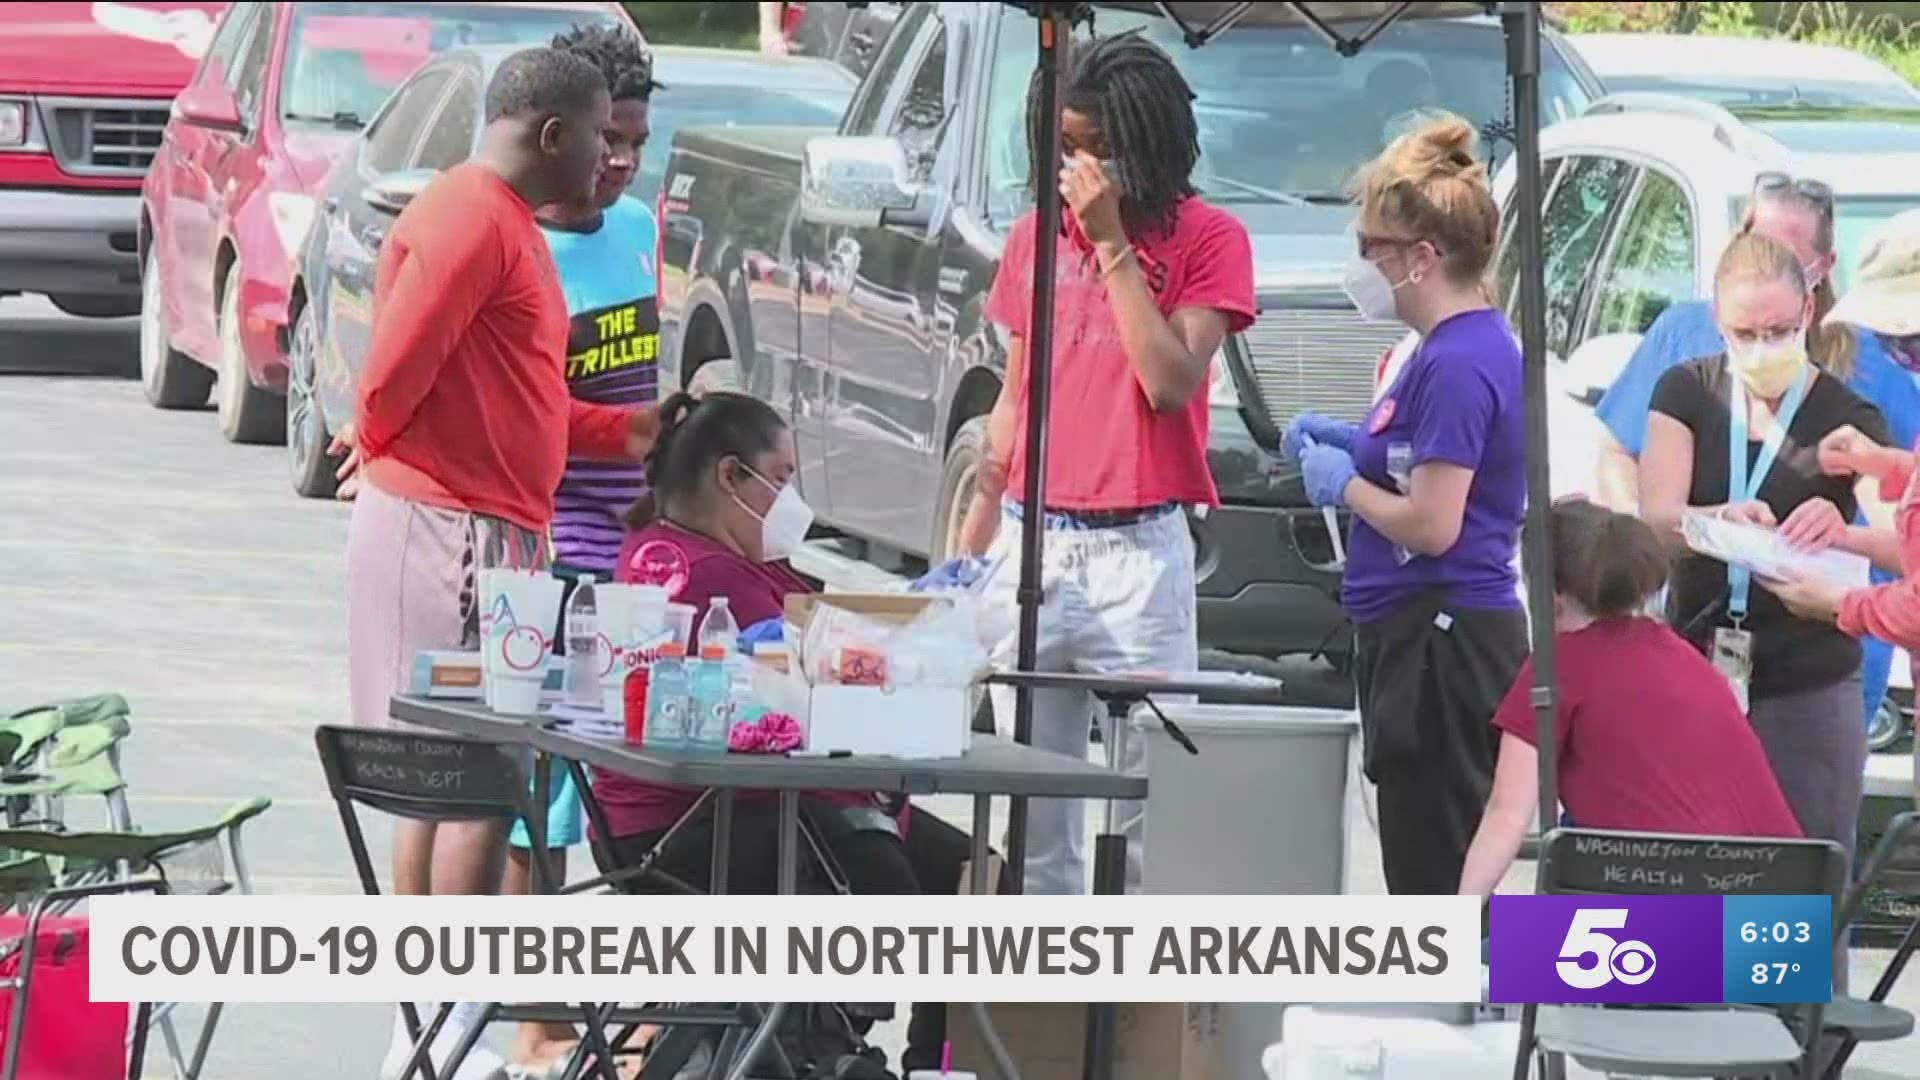 Health officials are trying to control the COVID-19 outbreak in Northwest Arkansas